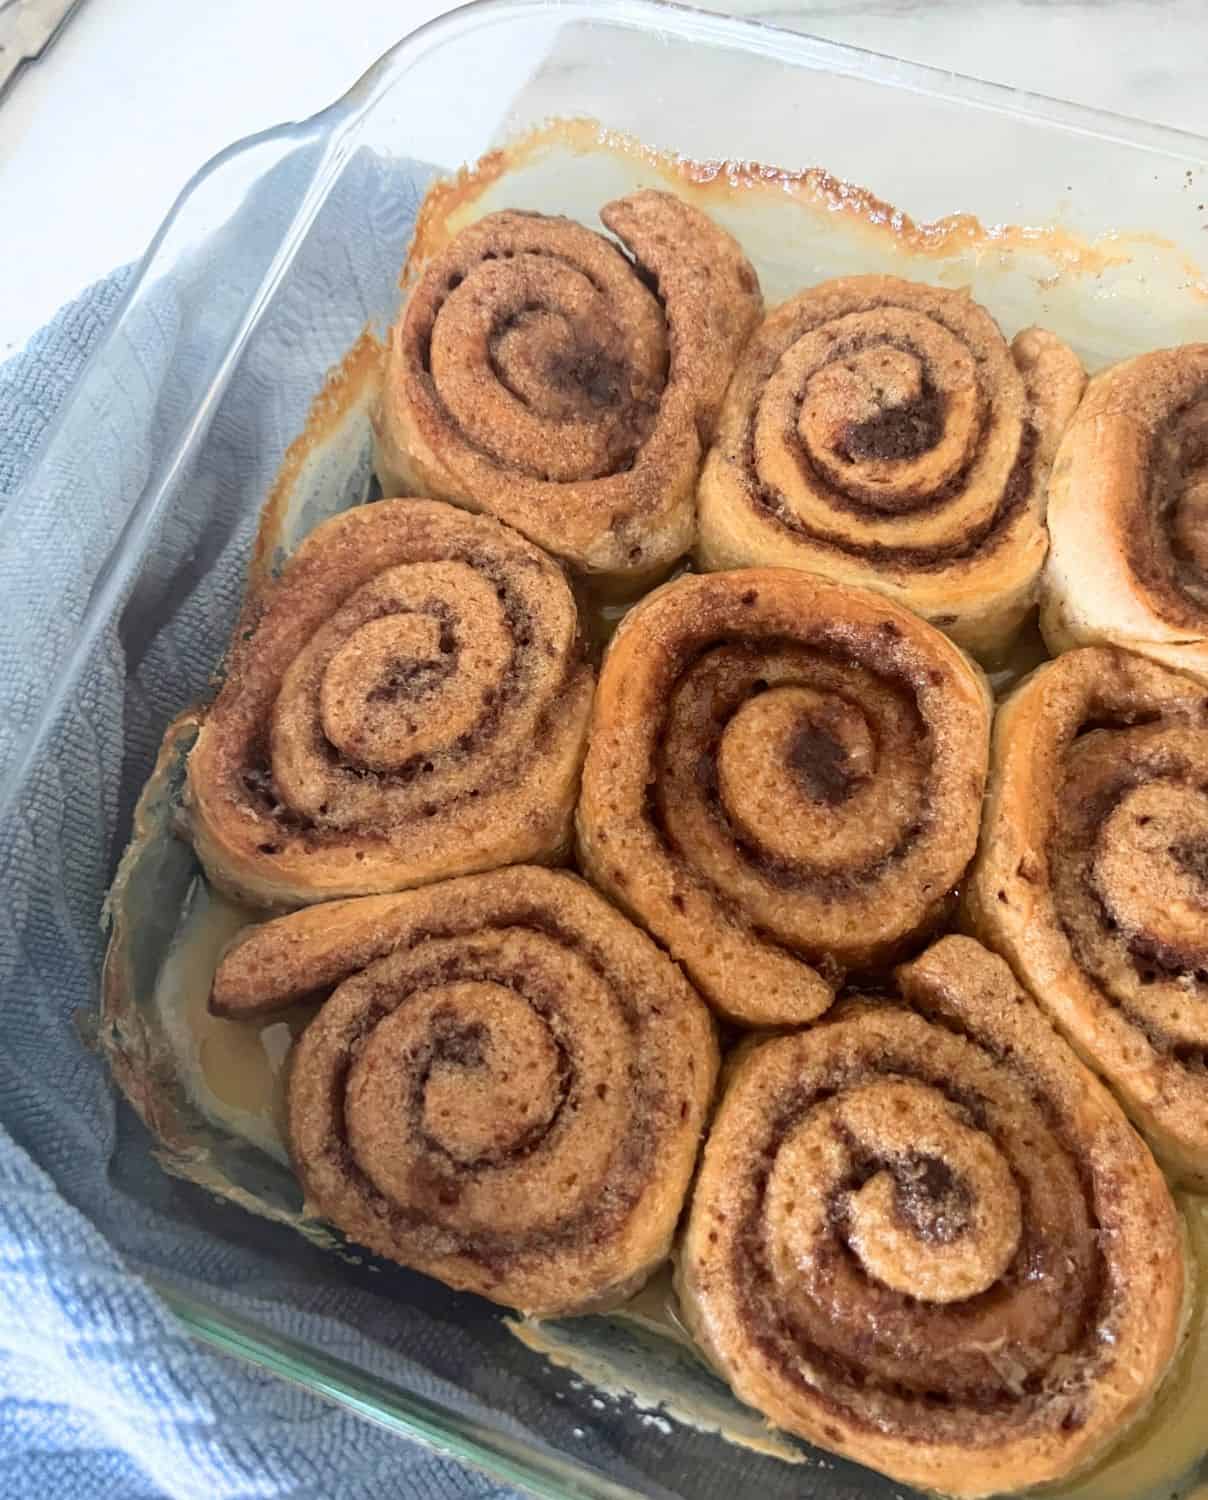 Finished Baked Cinnamon Rolls in Oven. 